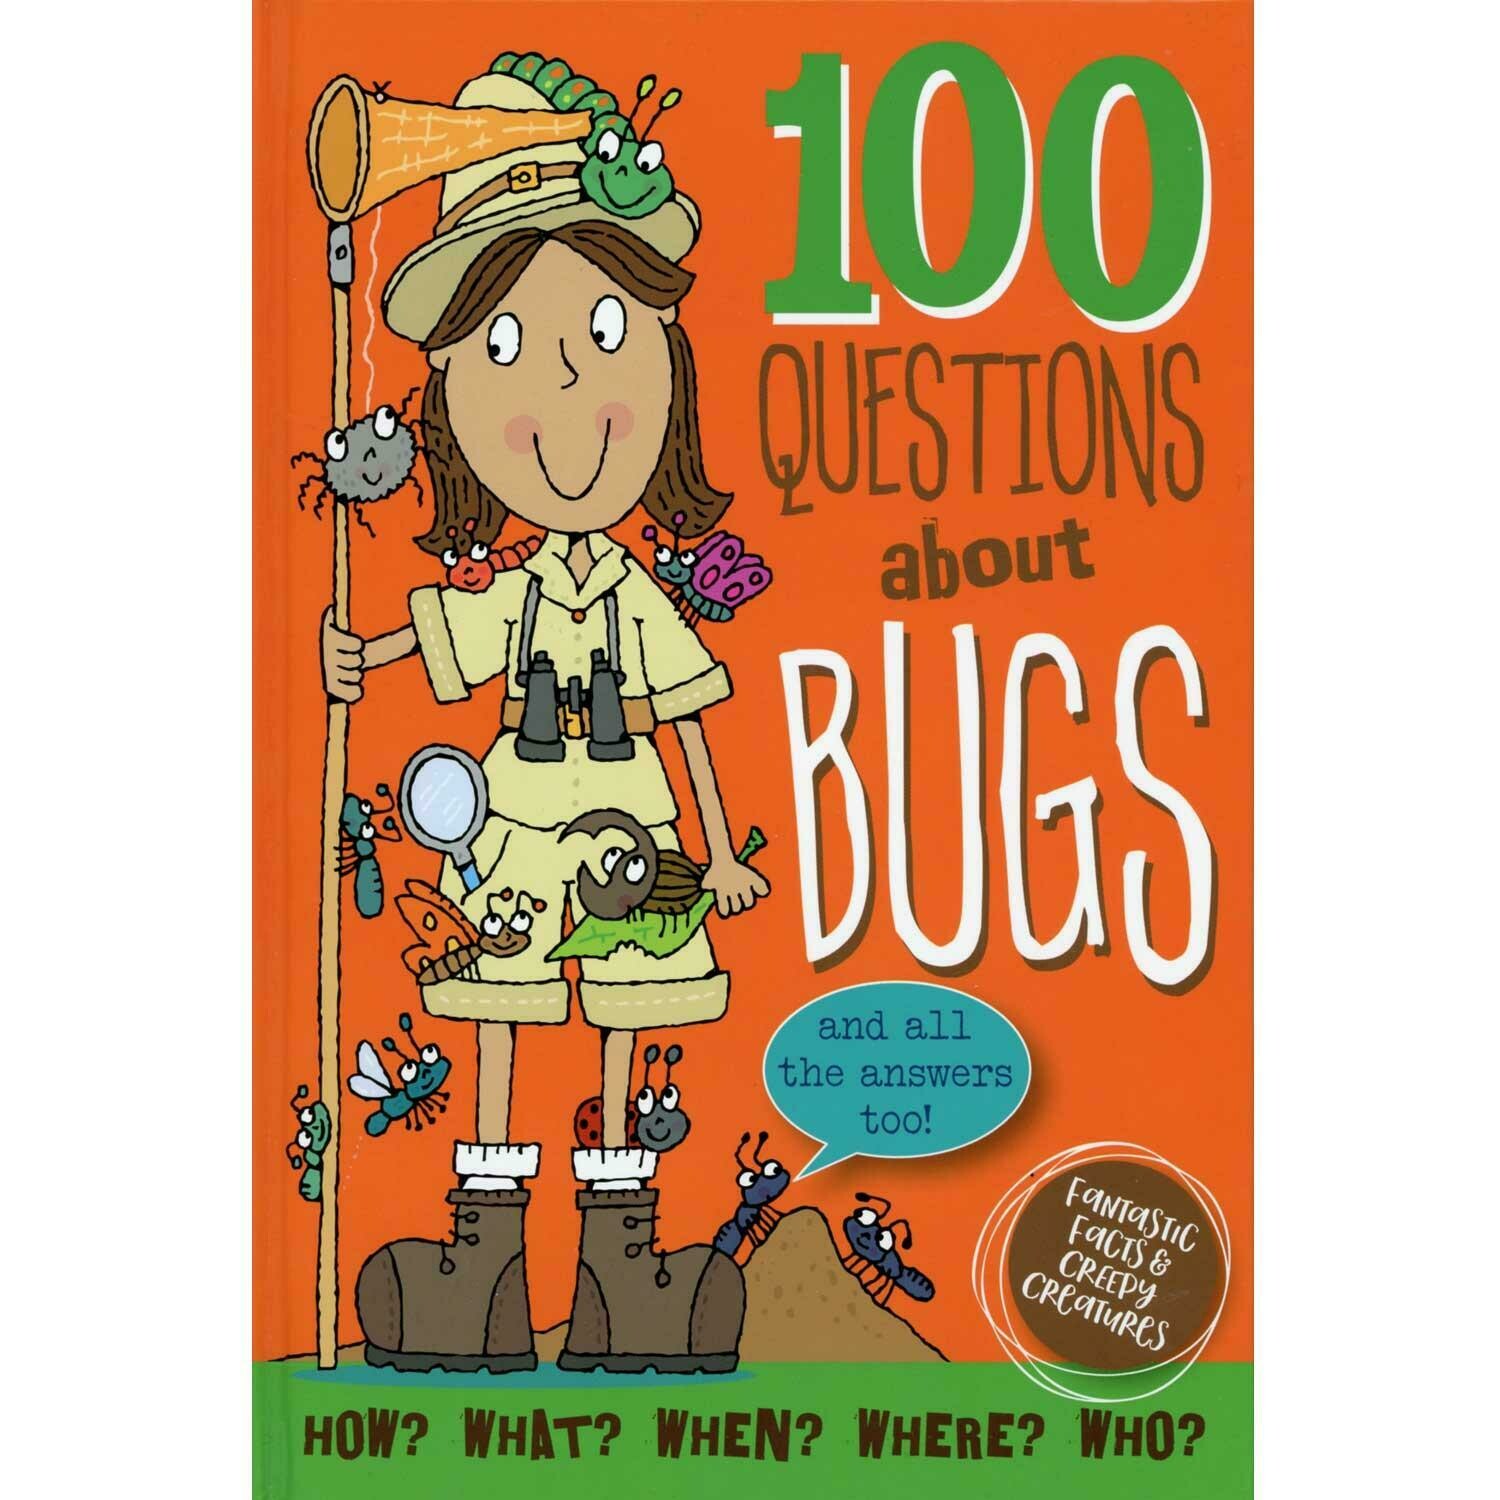 100 Questions about Bugs